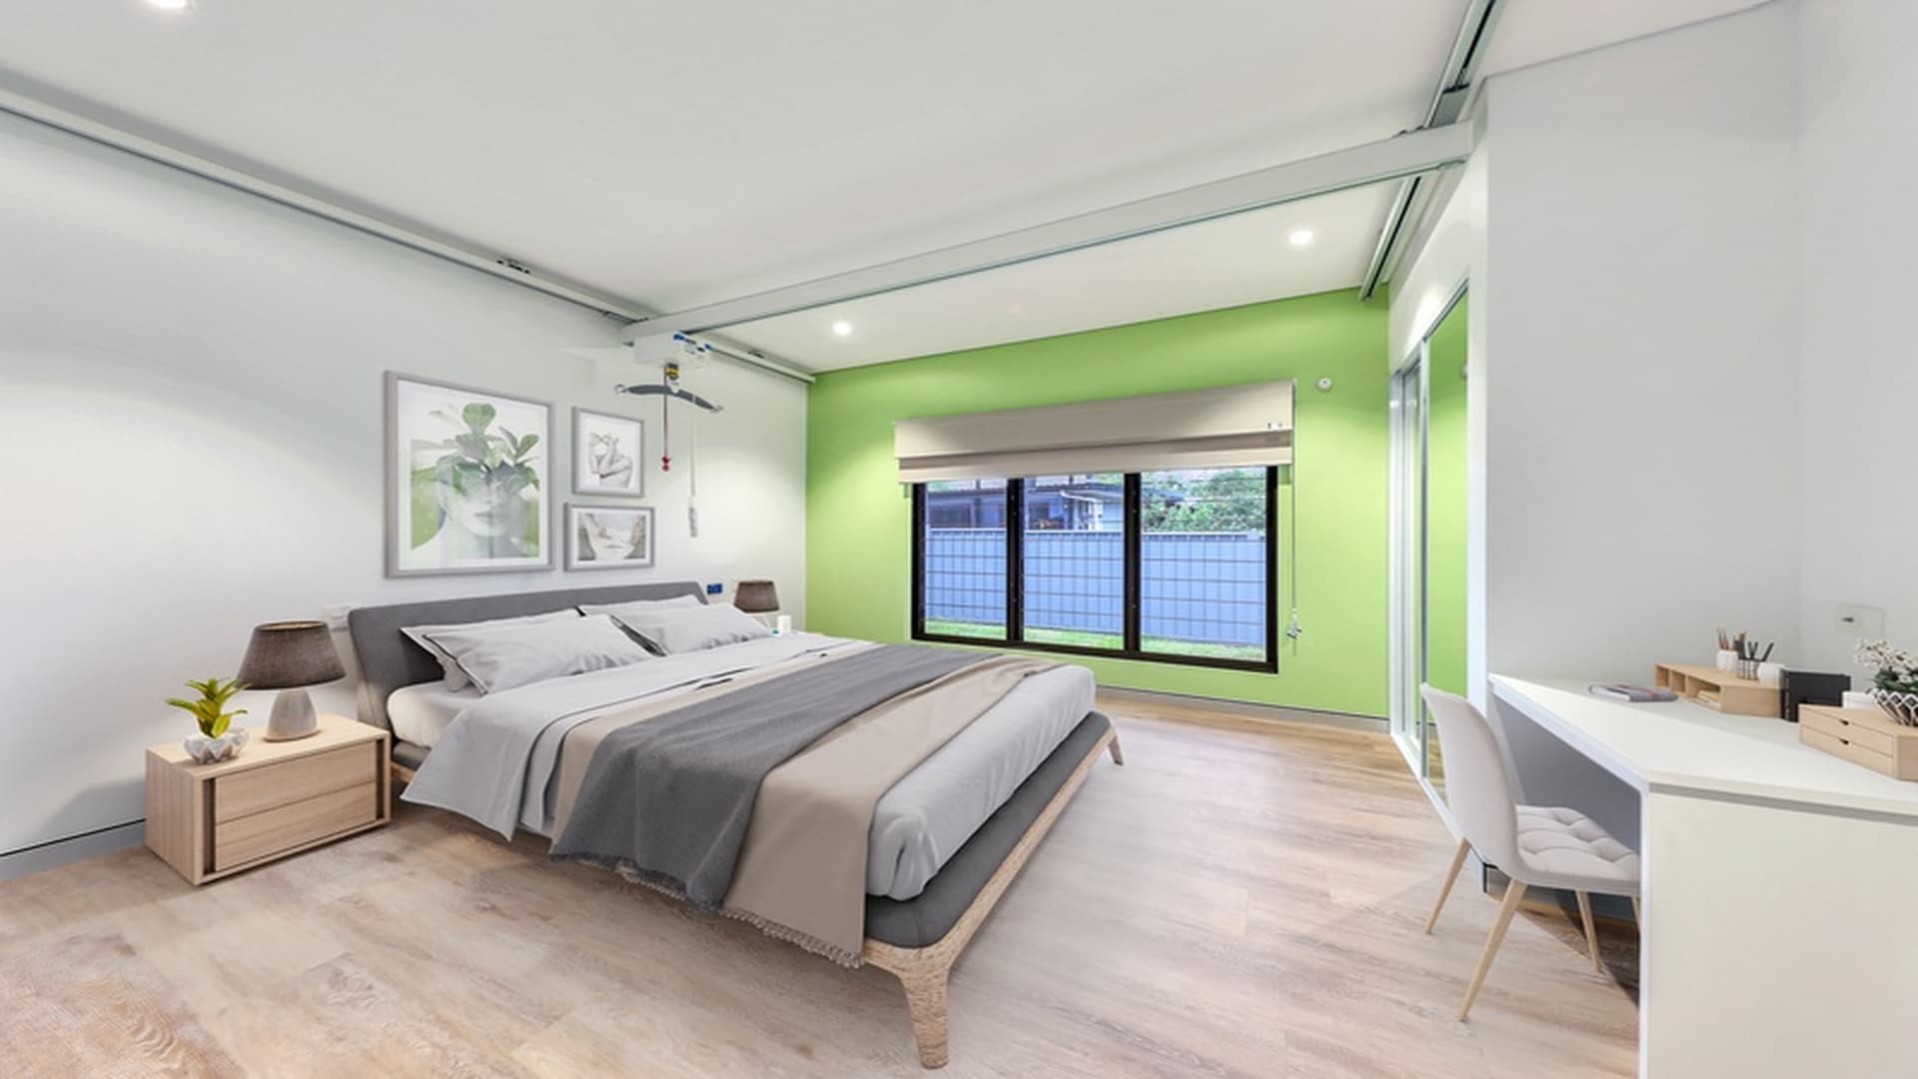 Spacious bedroom with louvres and green feature wall, combined with hard flooring and desk.